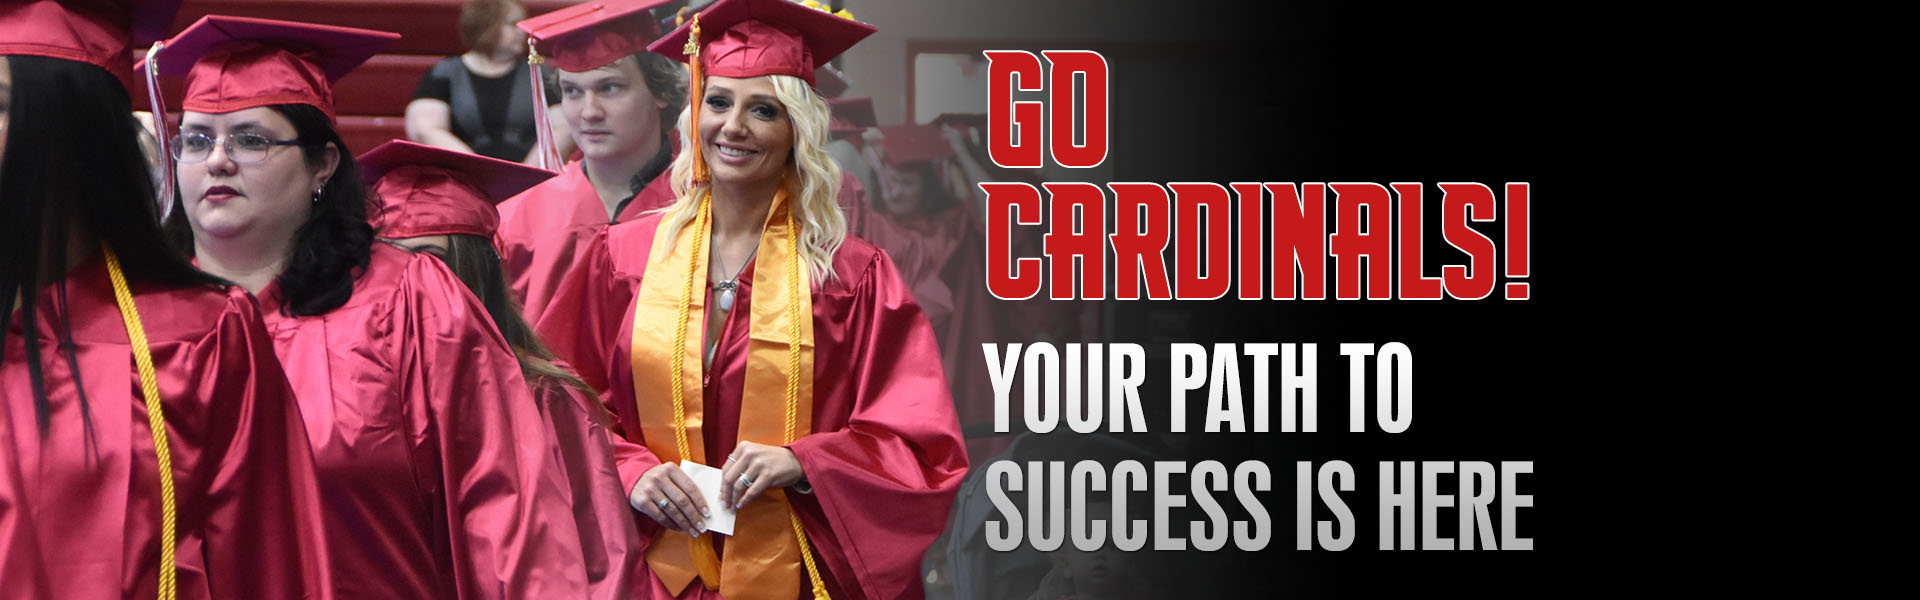 Go Cardinals! Your path to success is here.